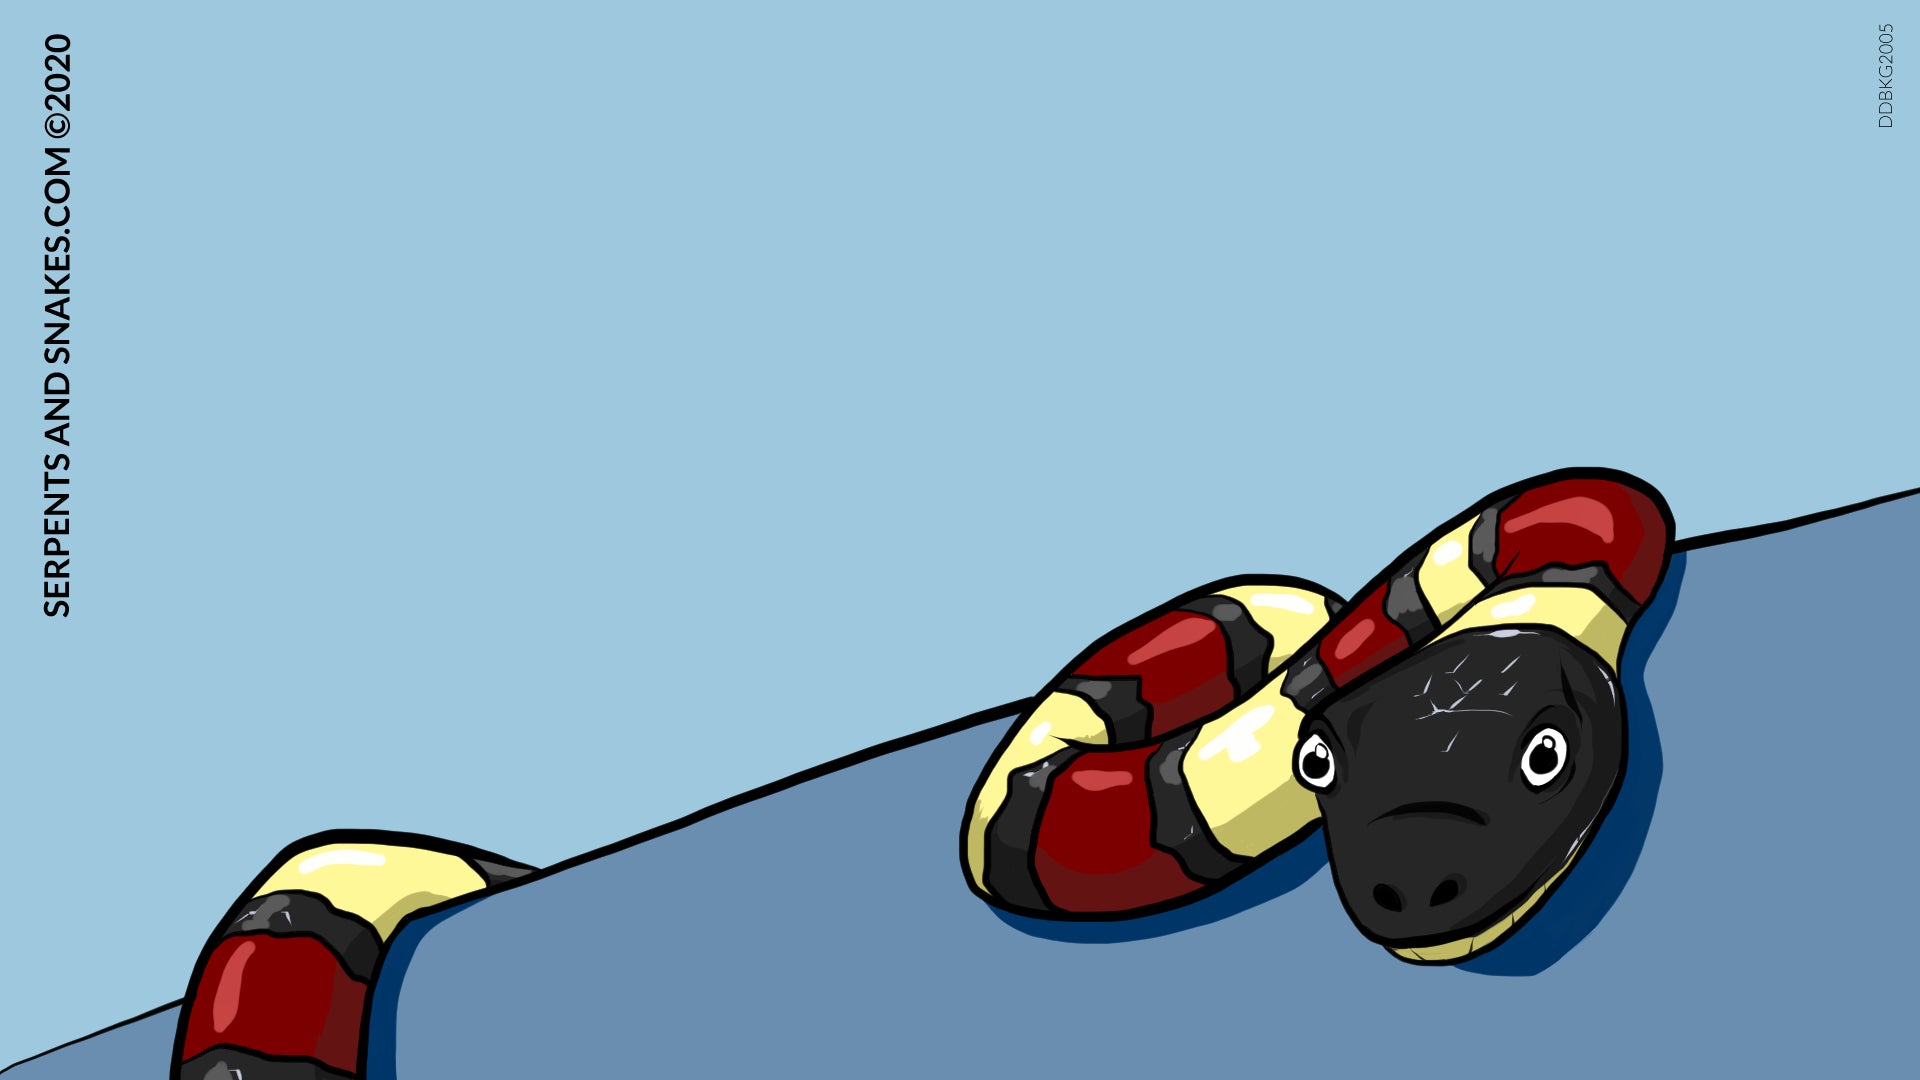 Digital Background. A cartoon King snake is lounging on a blue-grey surface.The snake has a black head, and its body alternates between yellow, black and red bands. Created by Serpents and Snakes copyright 2020